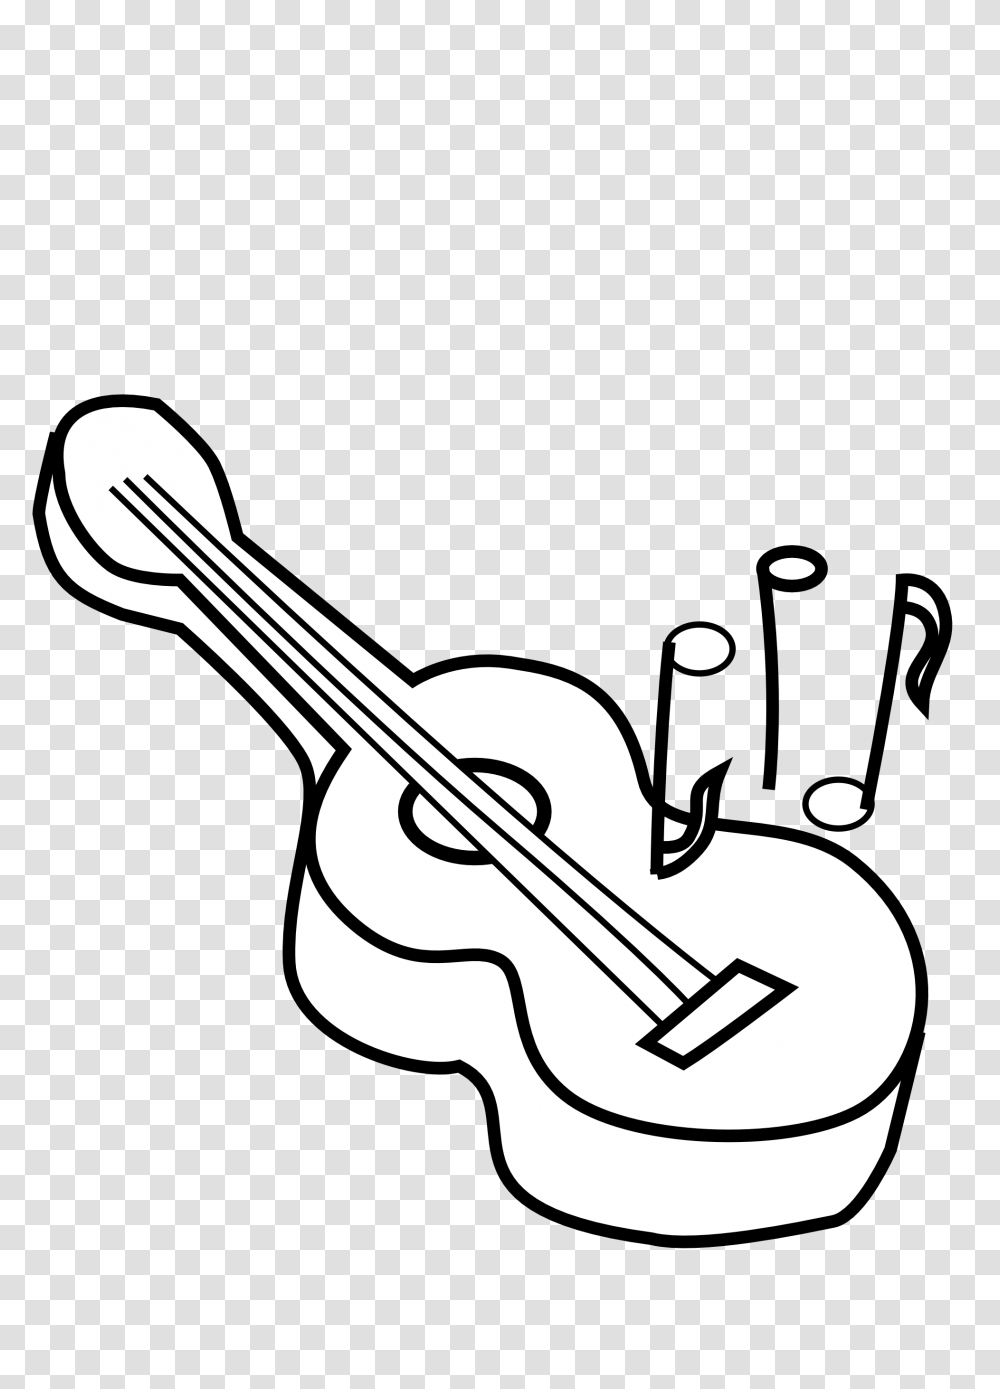 Instrument Clipart Black And White, Leisure Activities, Musical Instrument, Cello, Violin Transparent Png